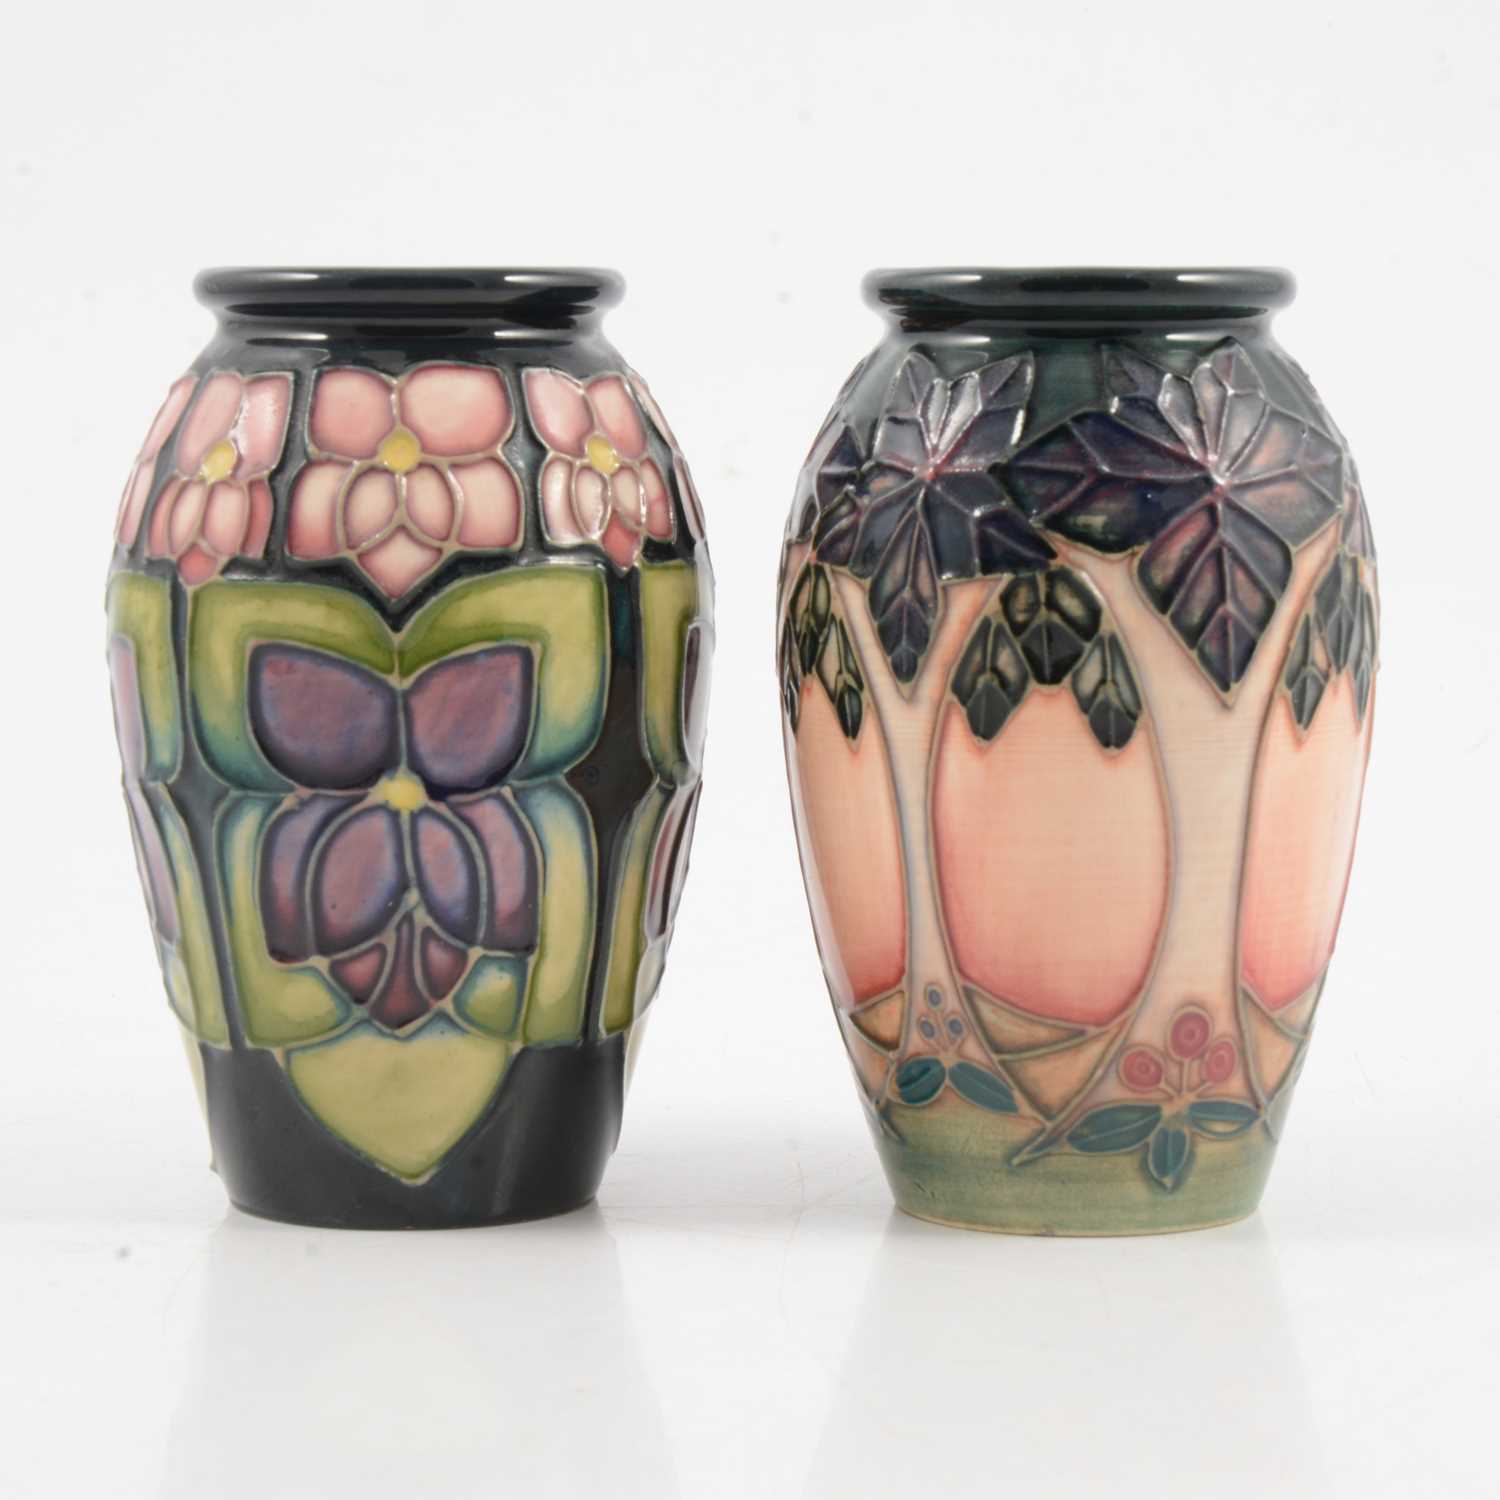 Lot 1 - Moorcroft Pottery, 'Cluny' and 'Violets' vases, designed by Sally Tuffin, 1993.